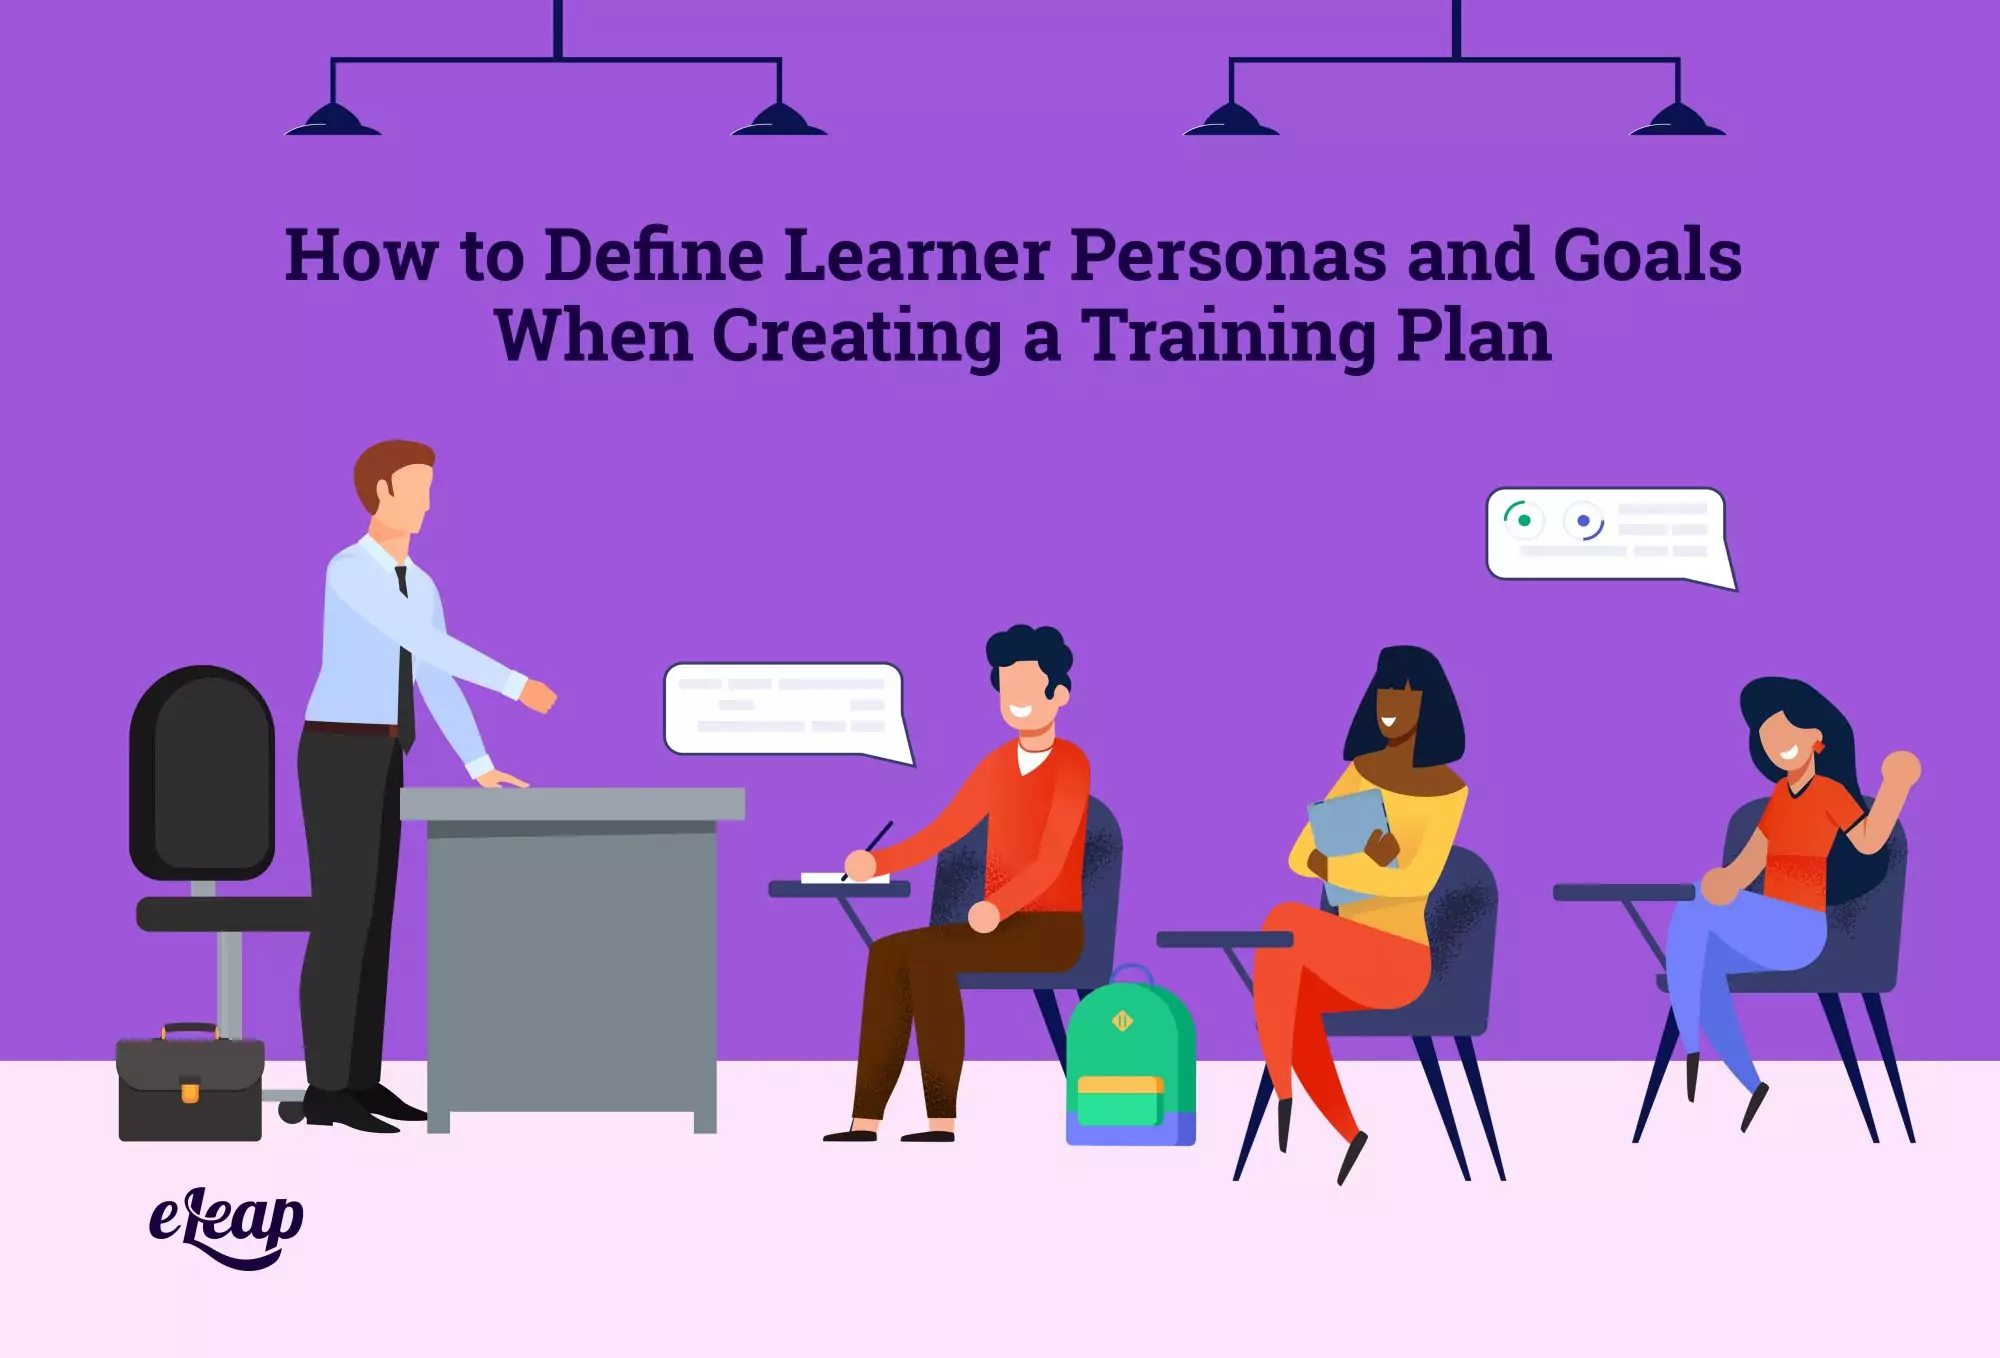 How to Define Learner Personas and Goals When Creating a Training Plan